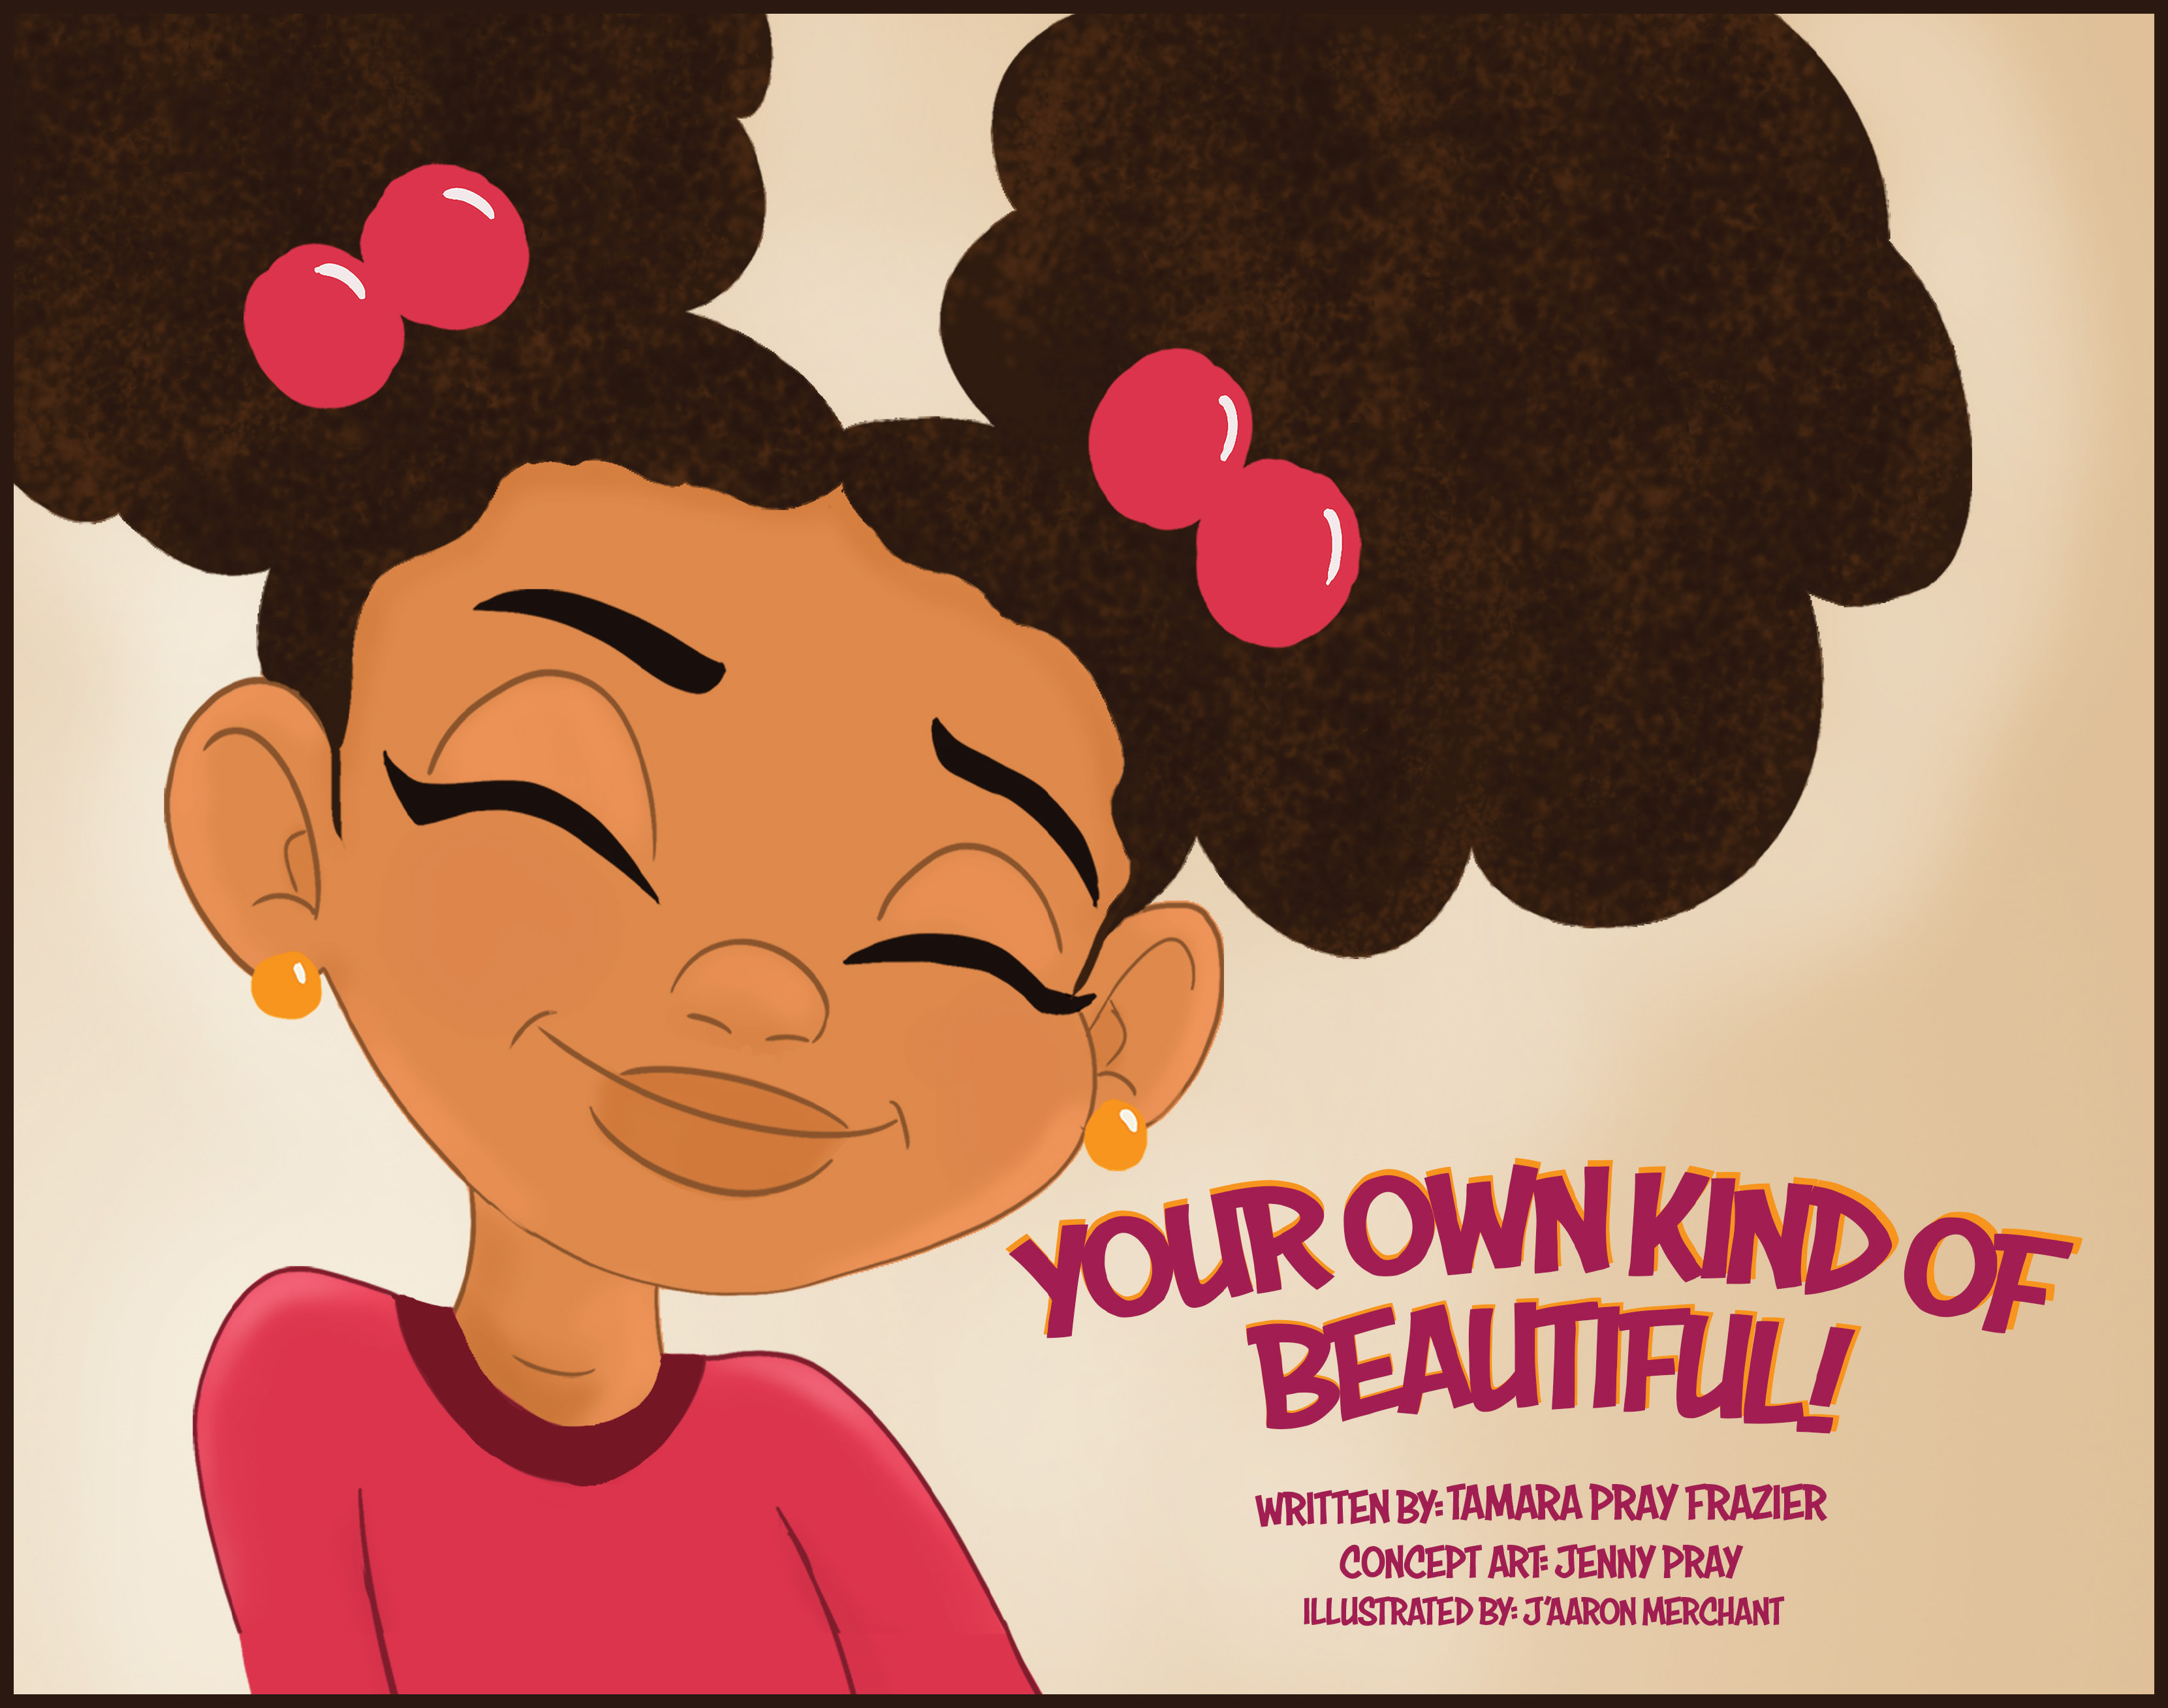 Your own kind of beautiful on successful black parenting magazine